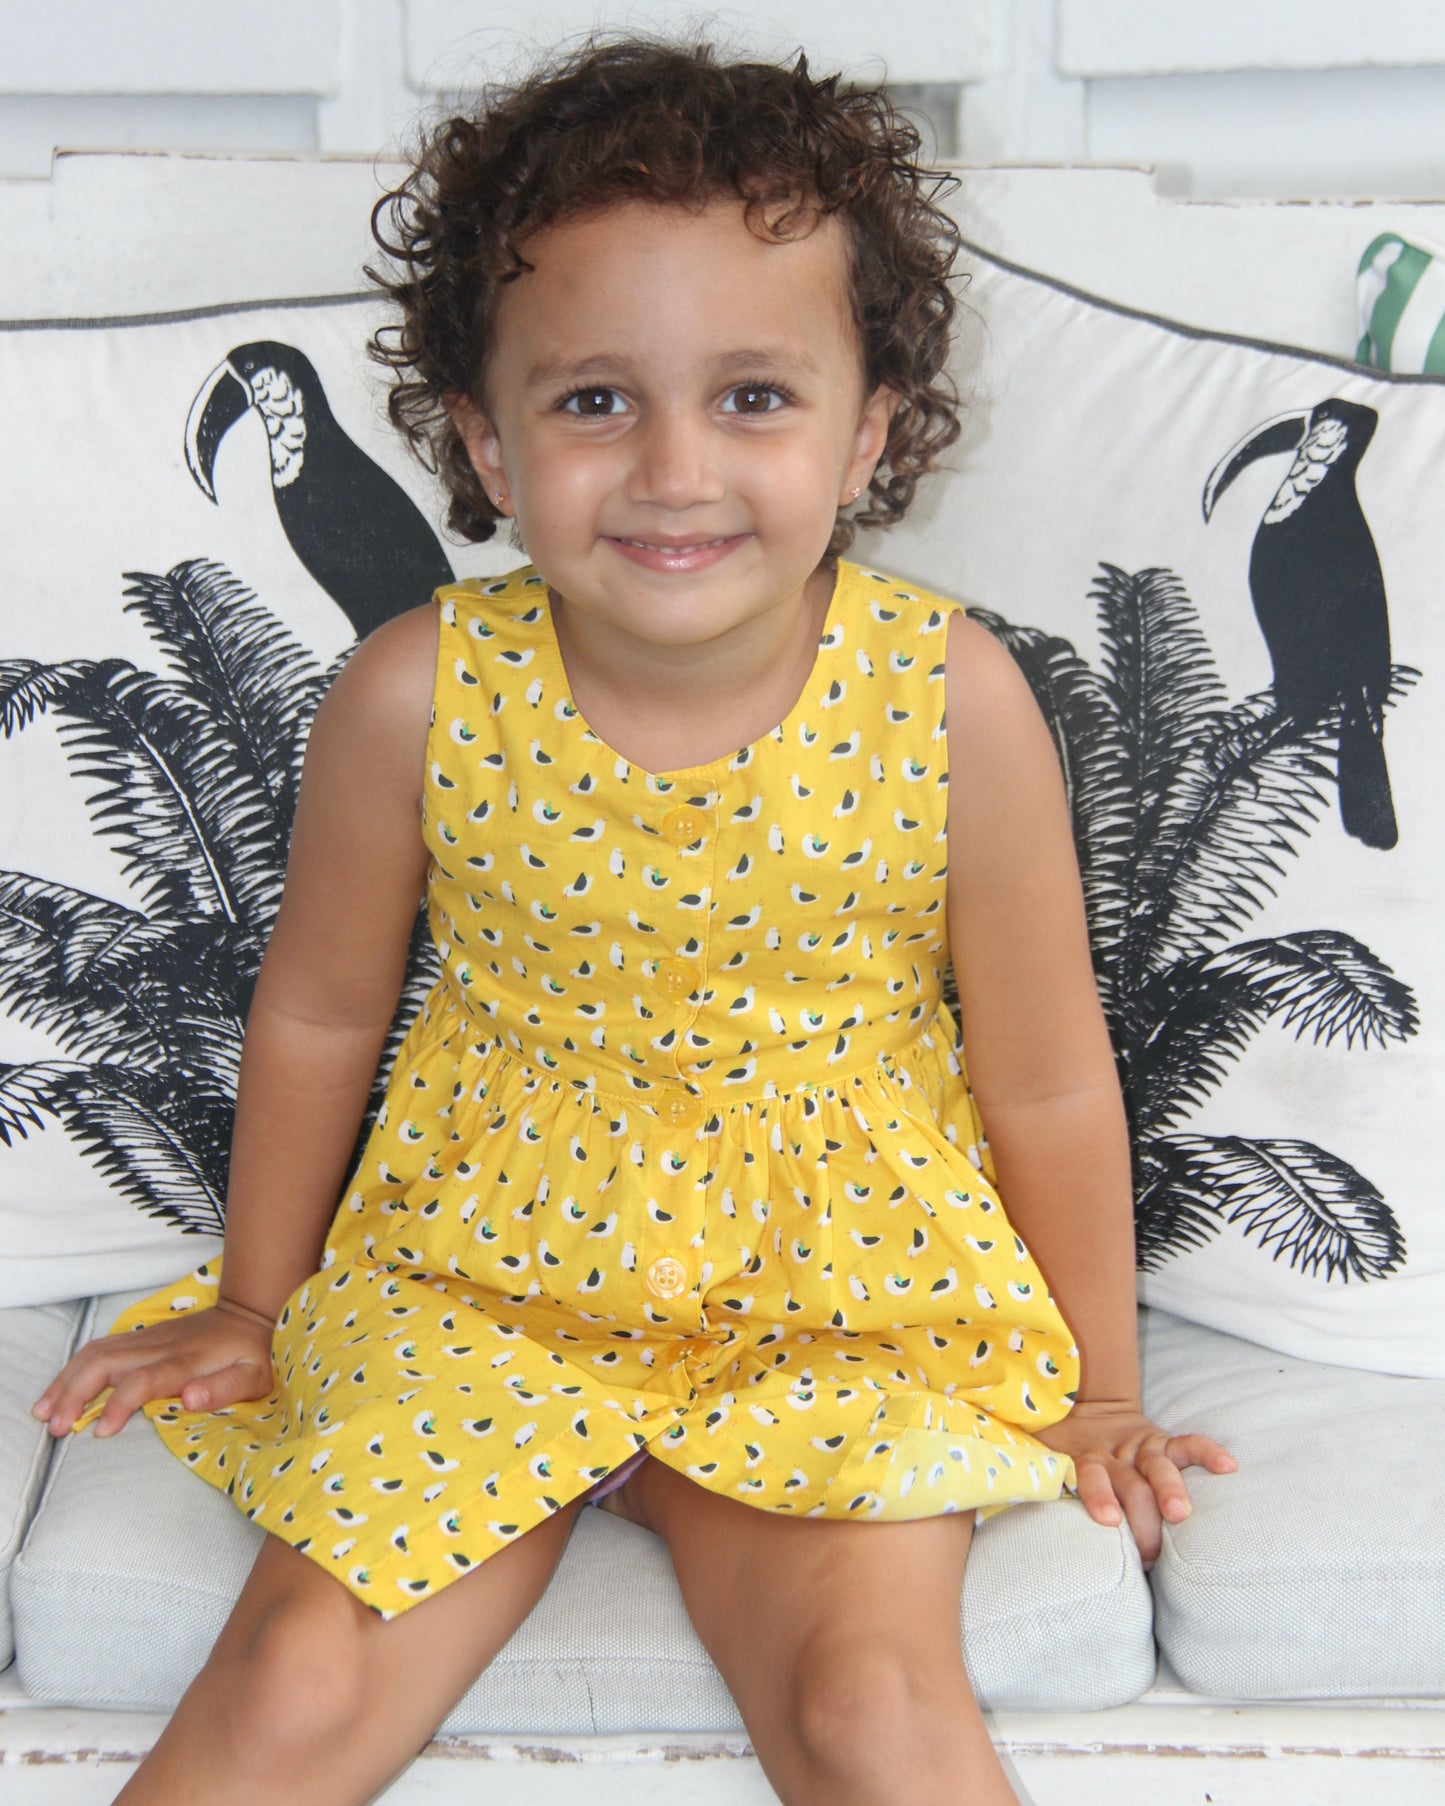 Sophie Dress - Seagulls On Yellow (Cotton)